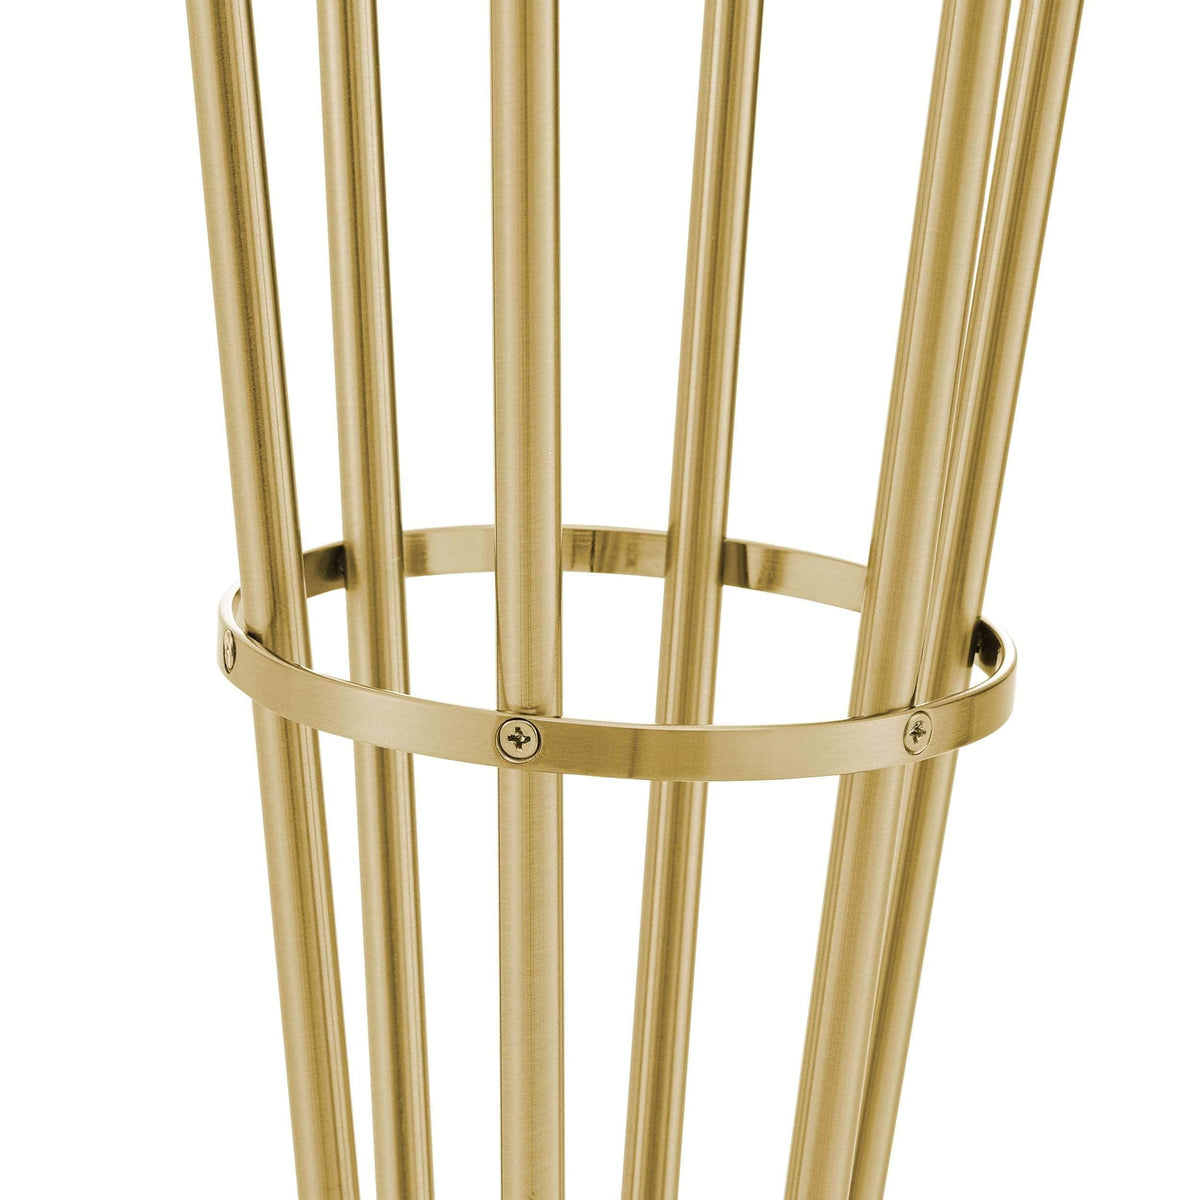 Anechdoche Floor Lamp / Gold and White / 6 Lights